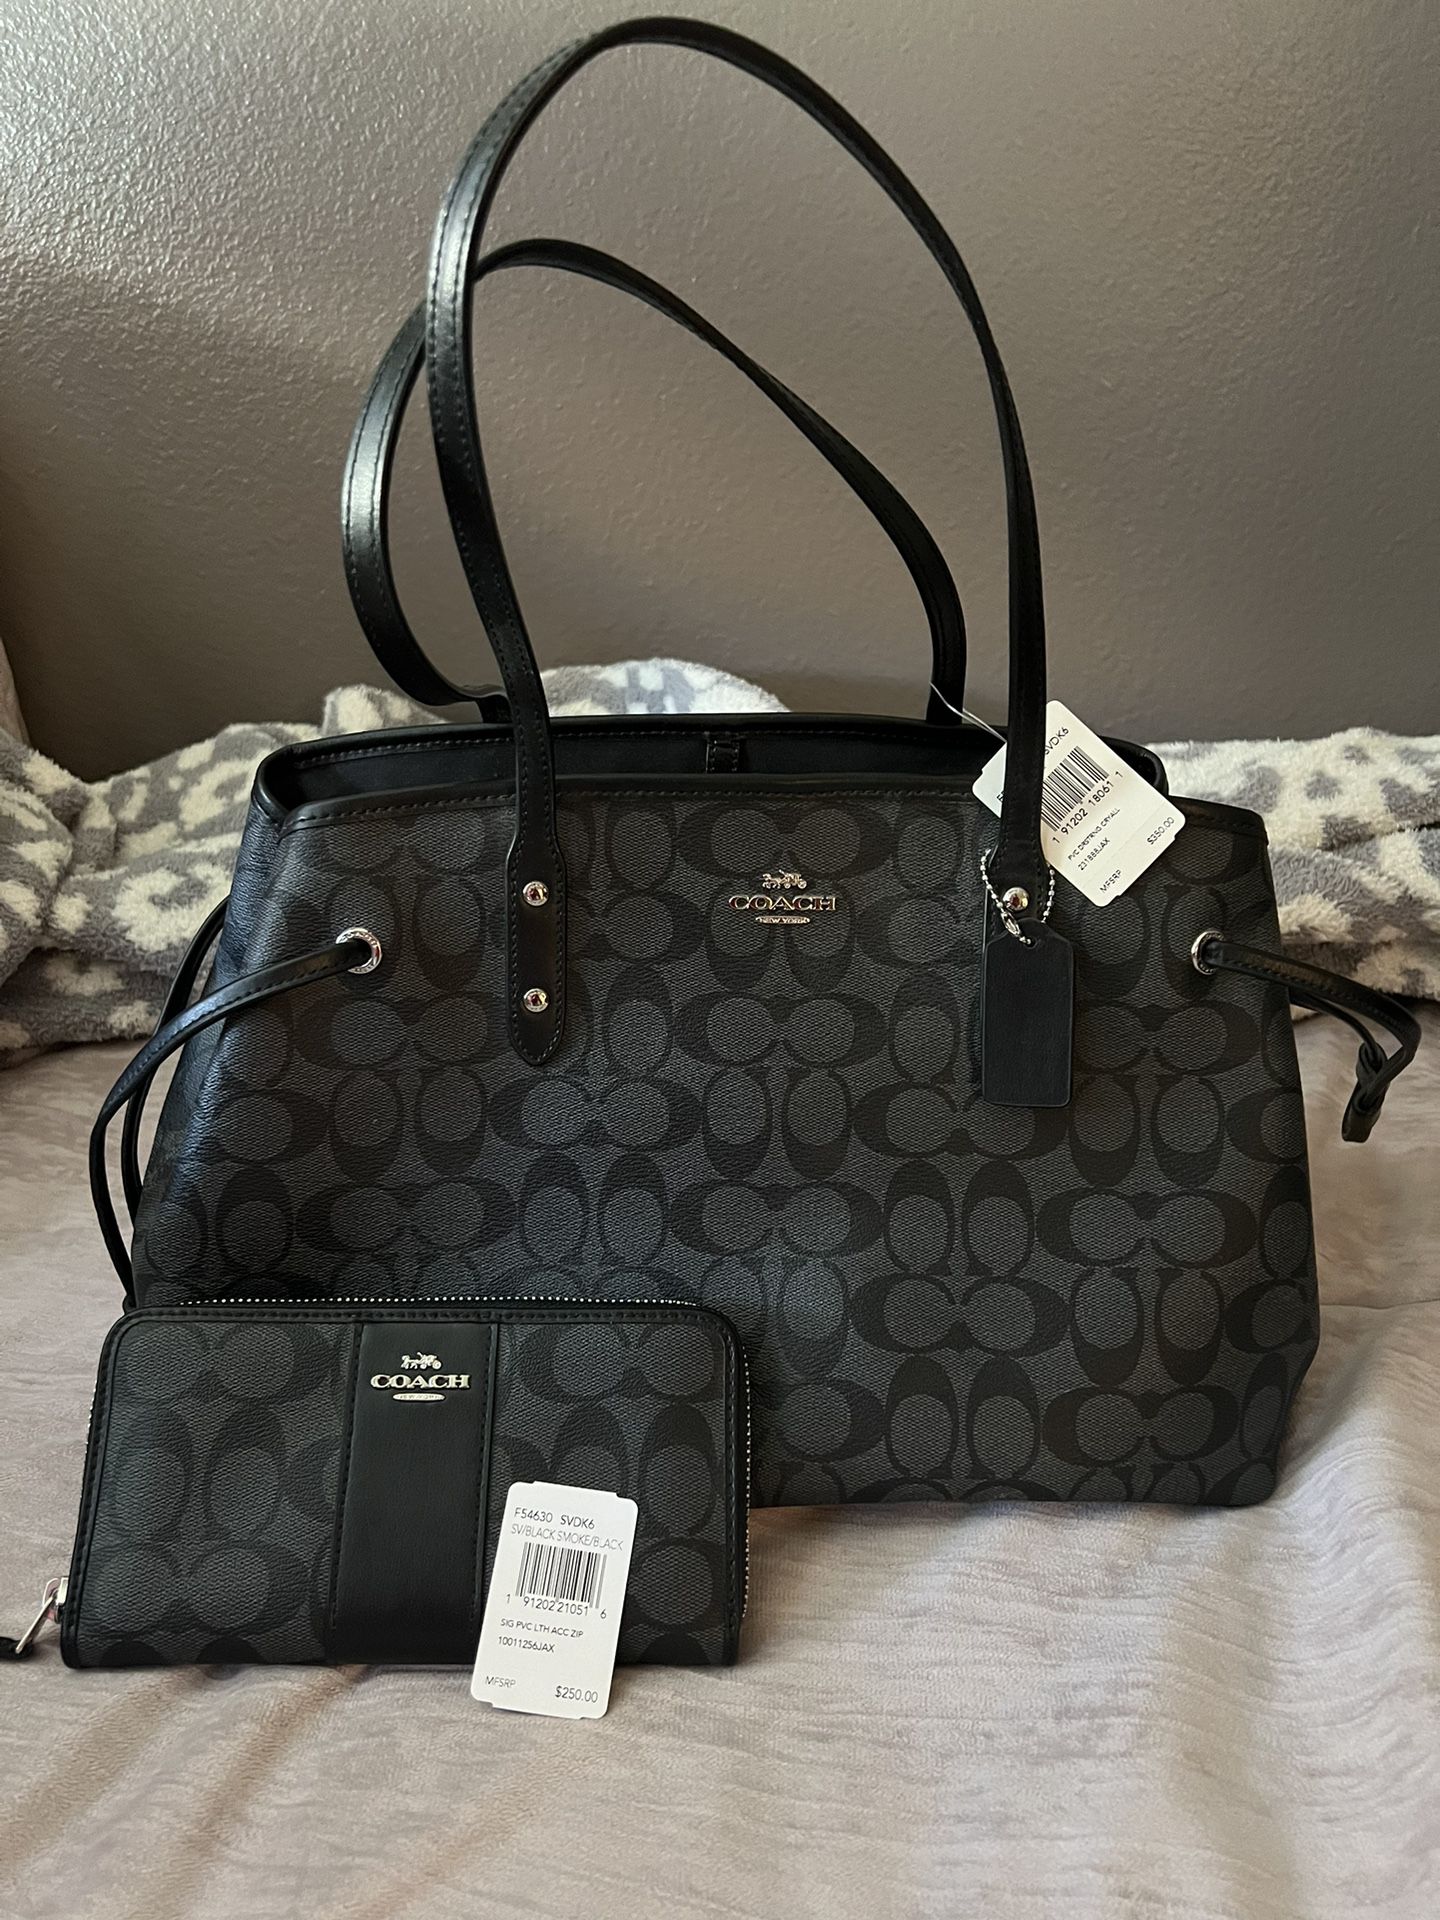 New Coach Purse And Wallet 